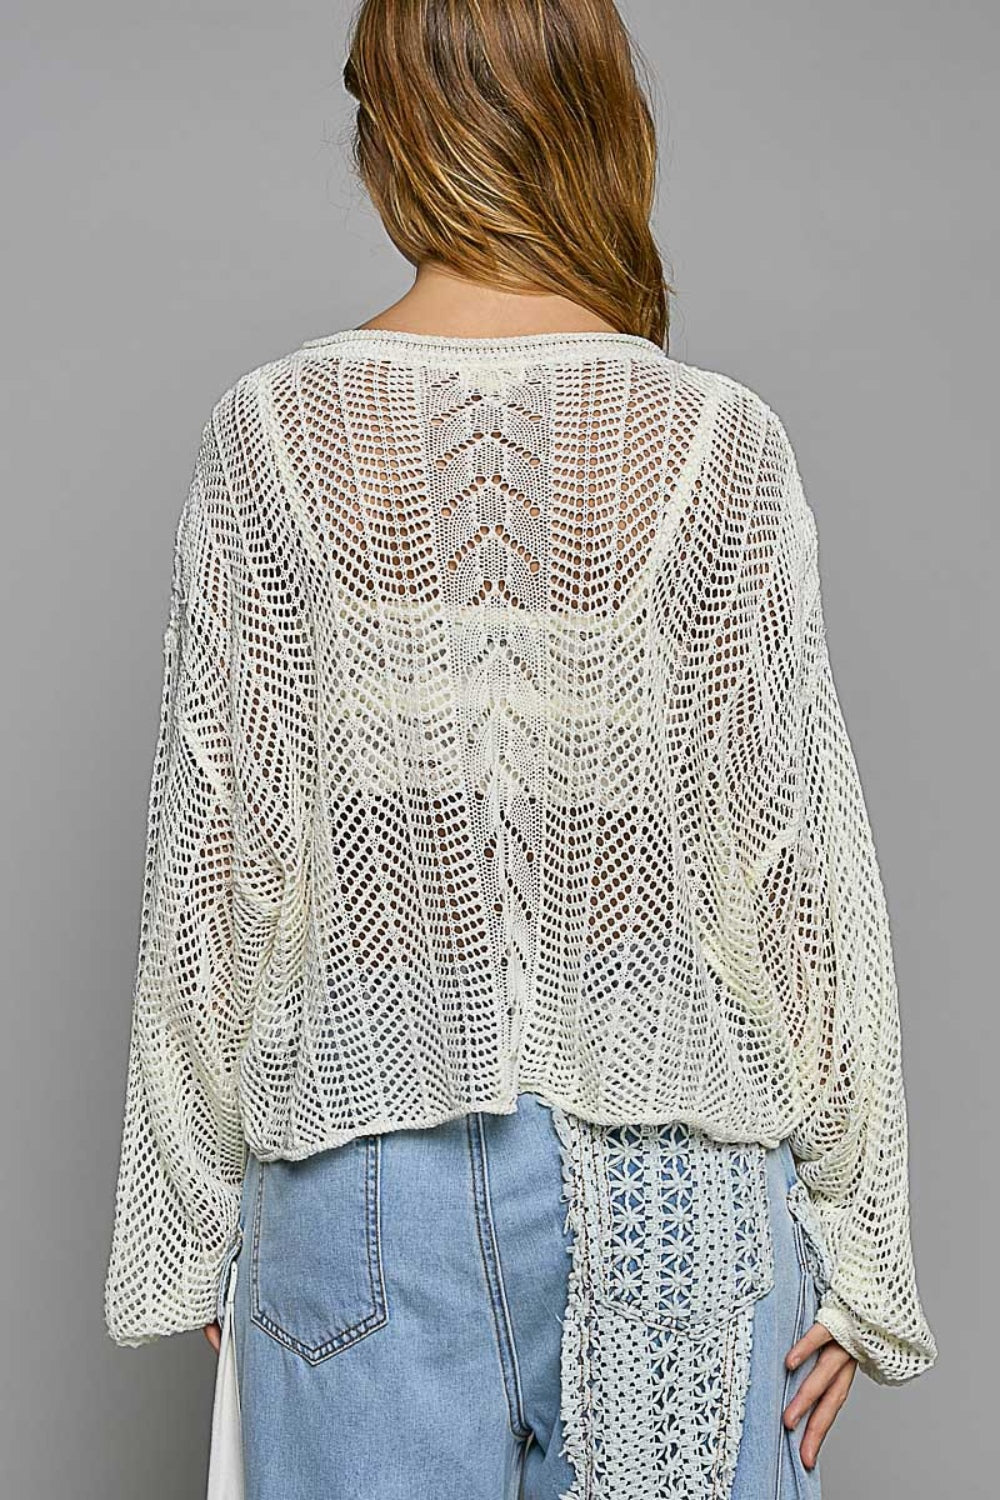 POL Openwork Balloon Sleeve Knit Cover Up | us.meeeshop